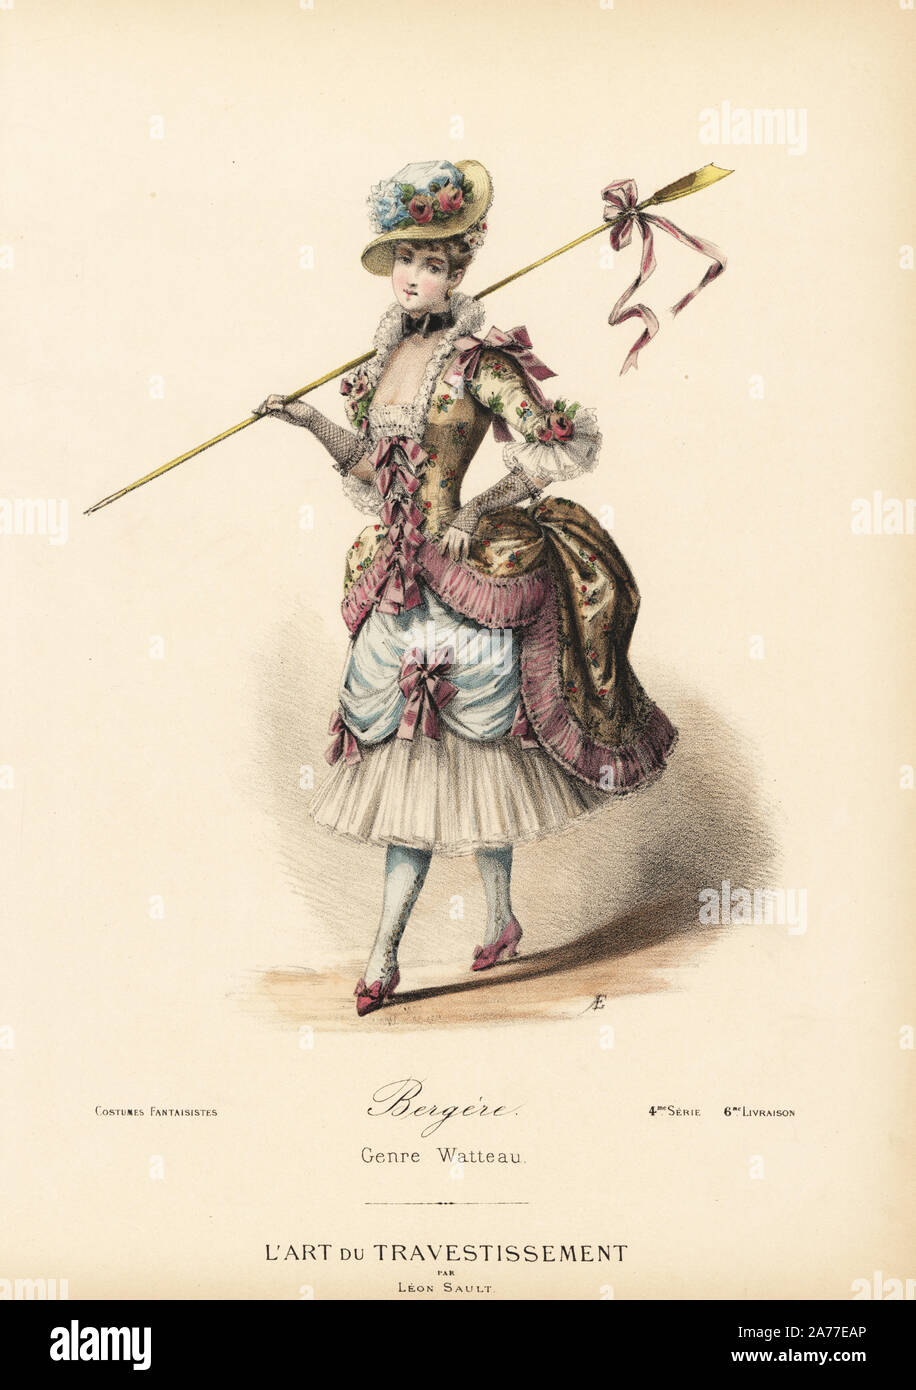 Fancy dress costume of a shepherdess in the Watteau style. Straw hat, silk dress embroidered with flowers, petticoats and ribbons. Handcoloured lithograph after a design by Leon Sault from 'L'Art du Travestissement' (The Art of Fancy Dress), Paris, c.1880. Sault was a theatre and opera designer and luxury fashion magazine publisher. Stock Photo